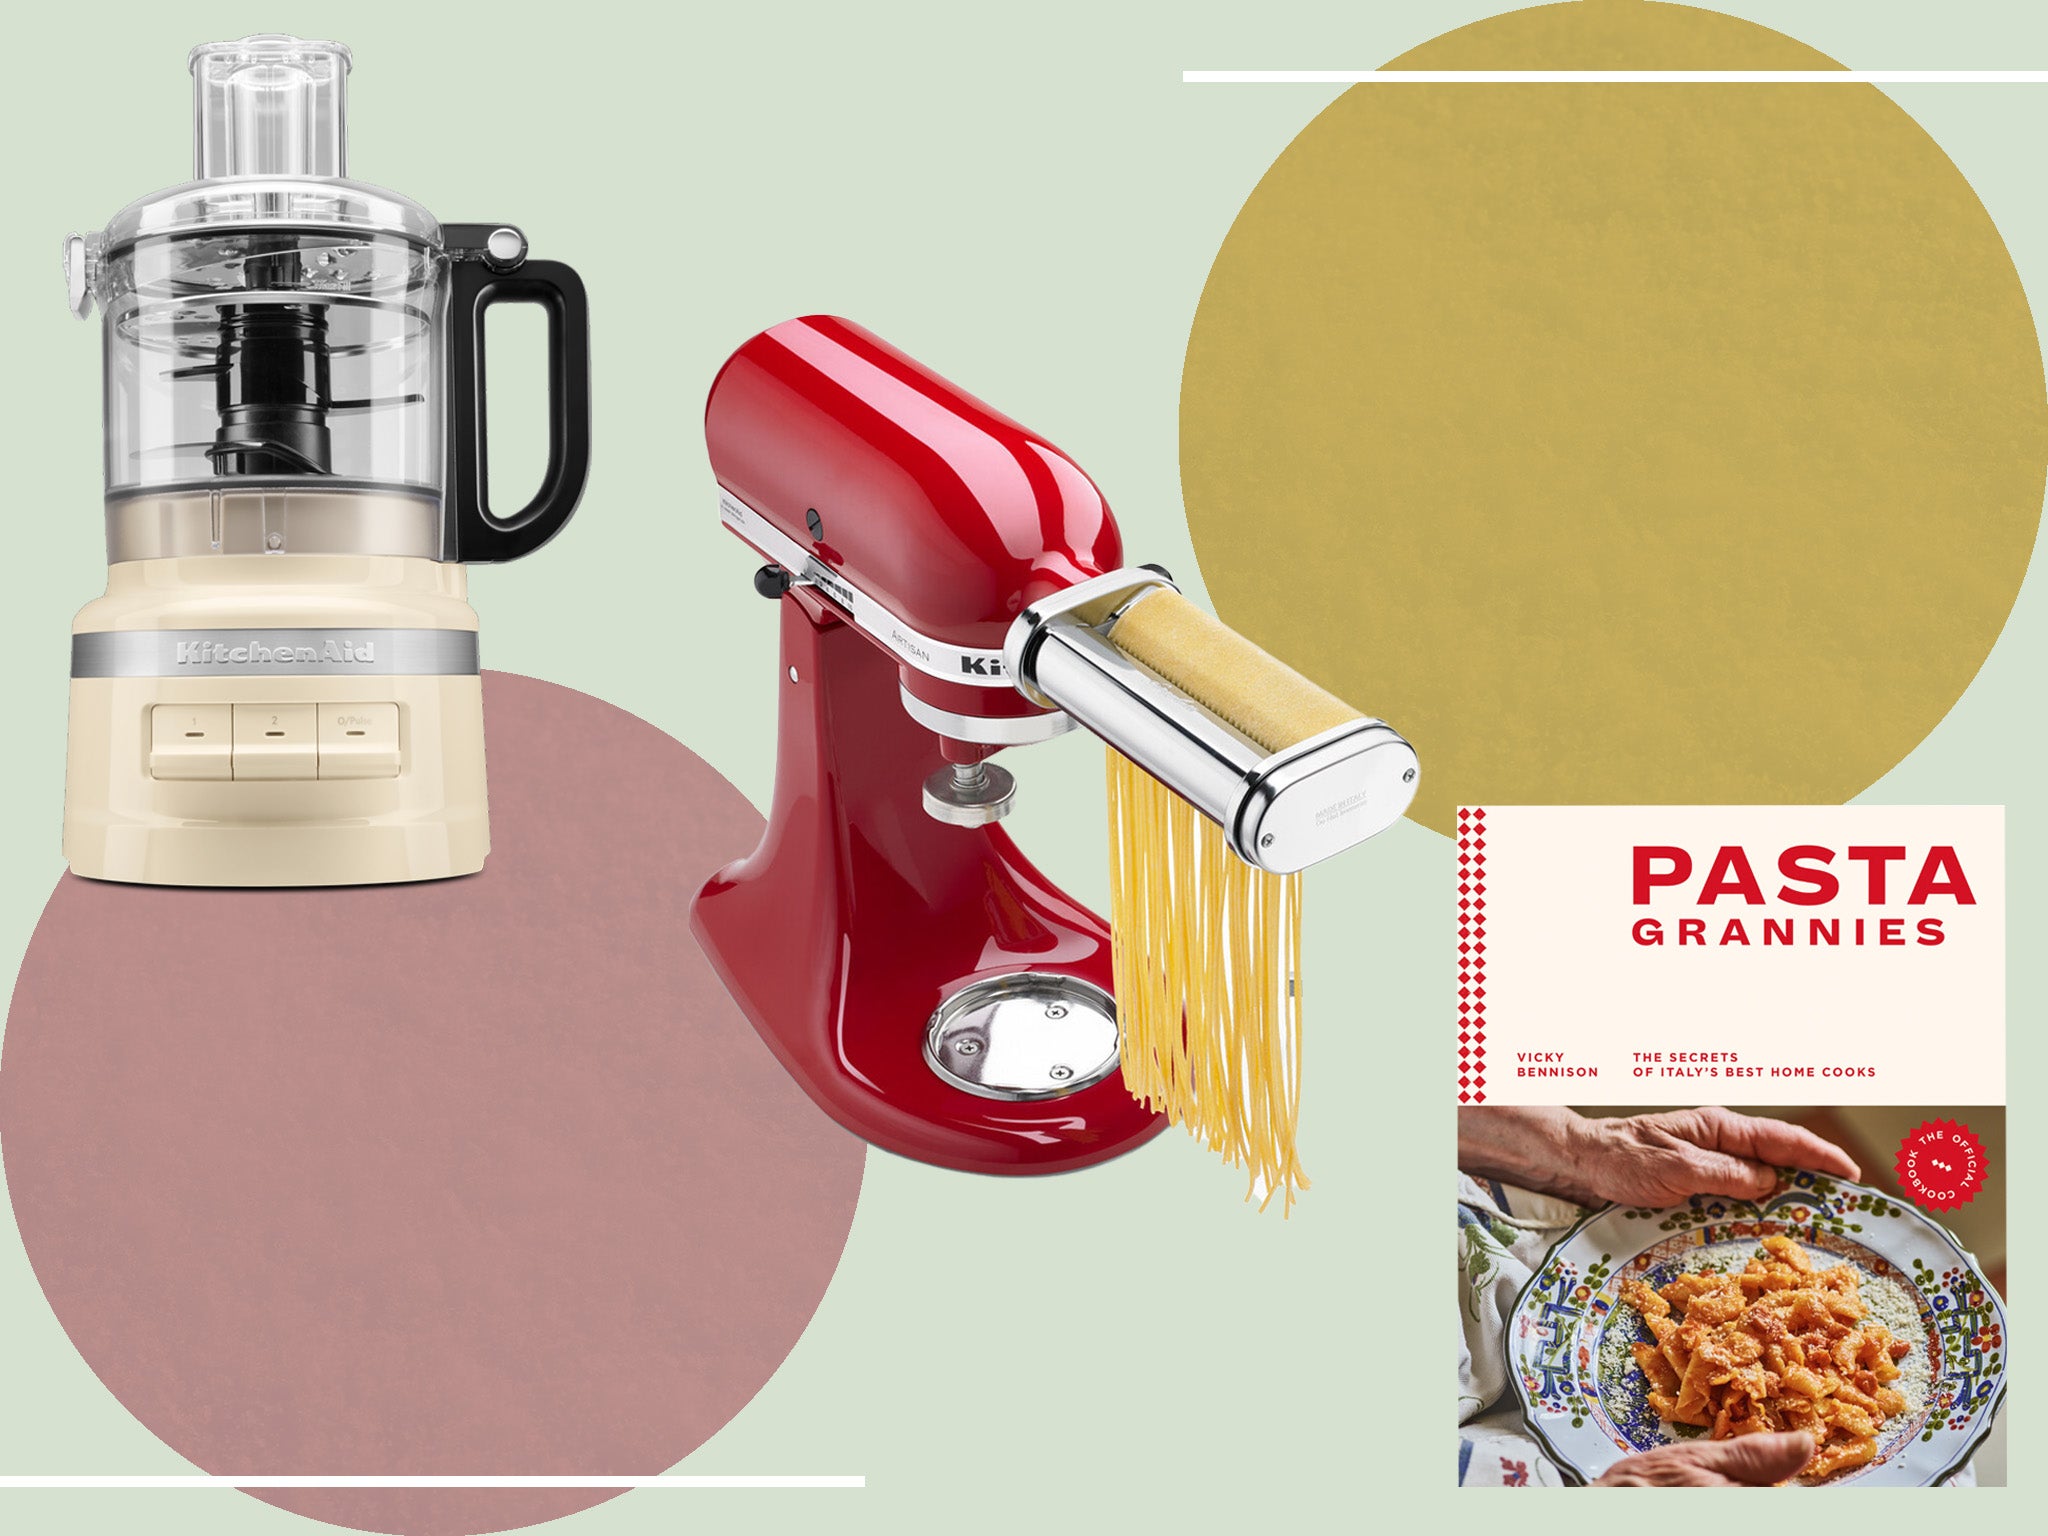 Making it yourself doesn’t need to be difficult with these kitchen essentials